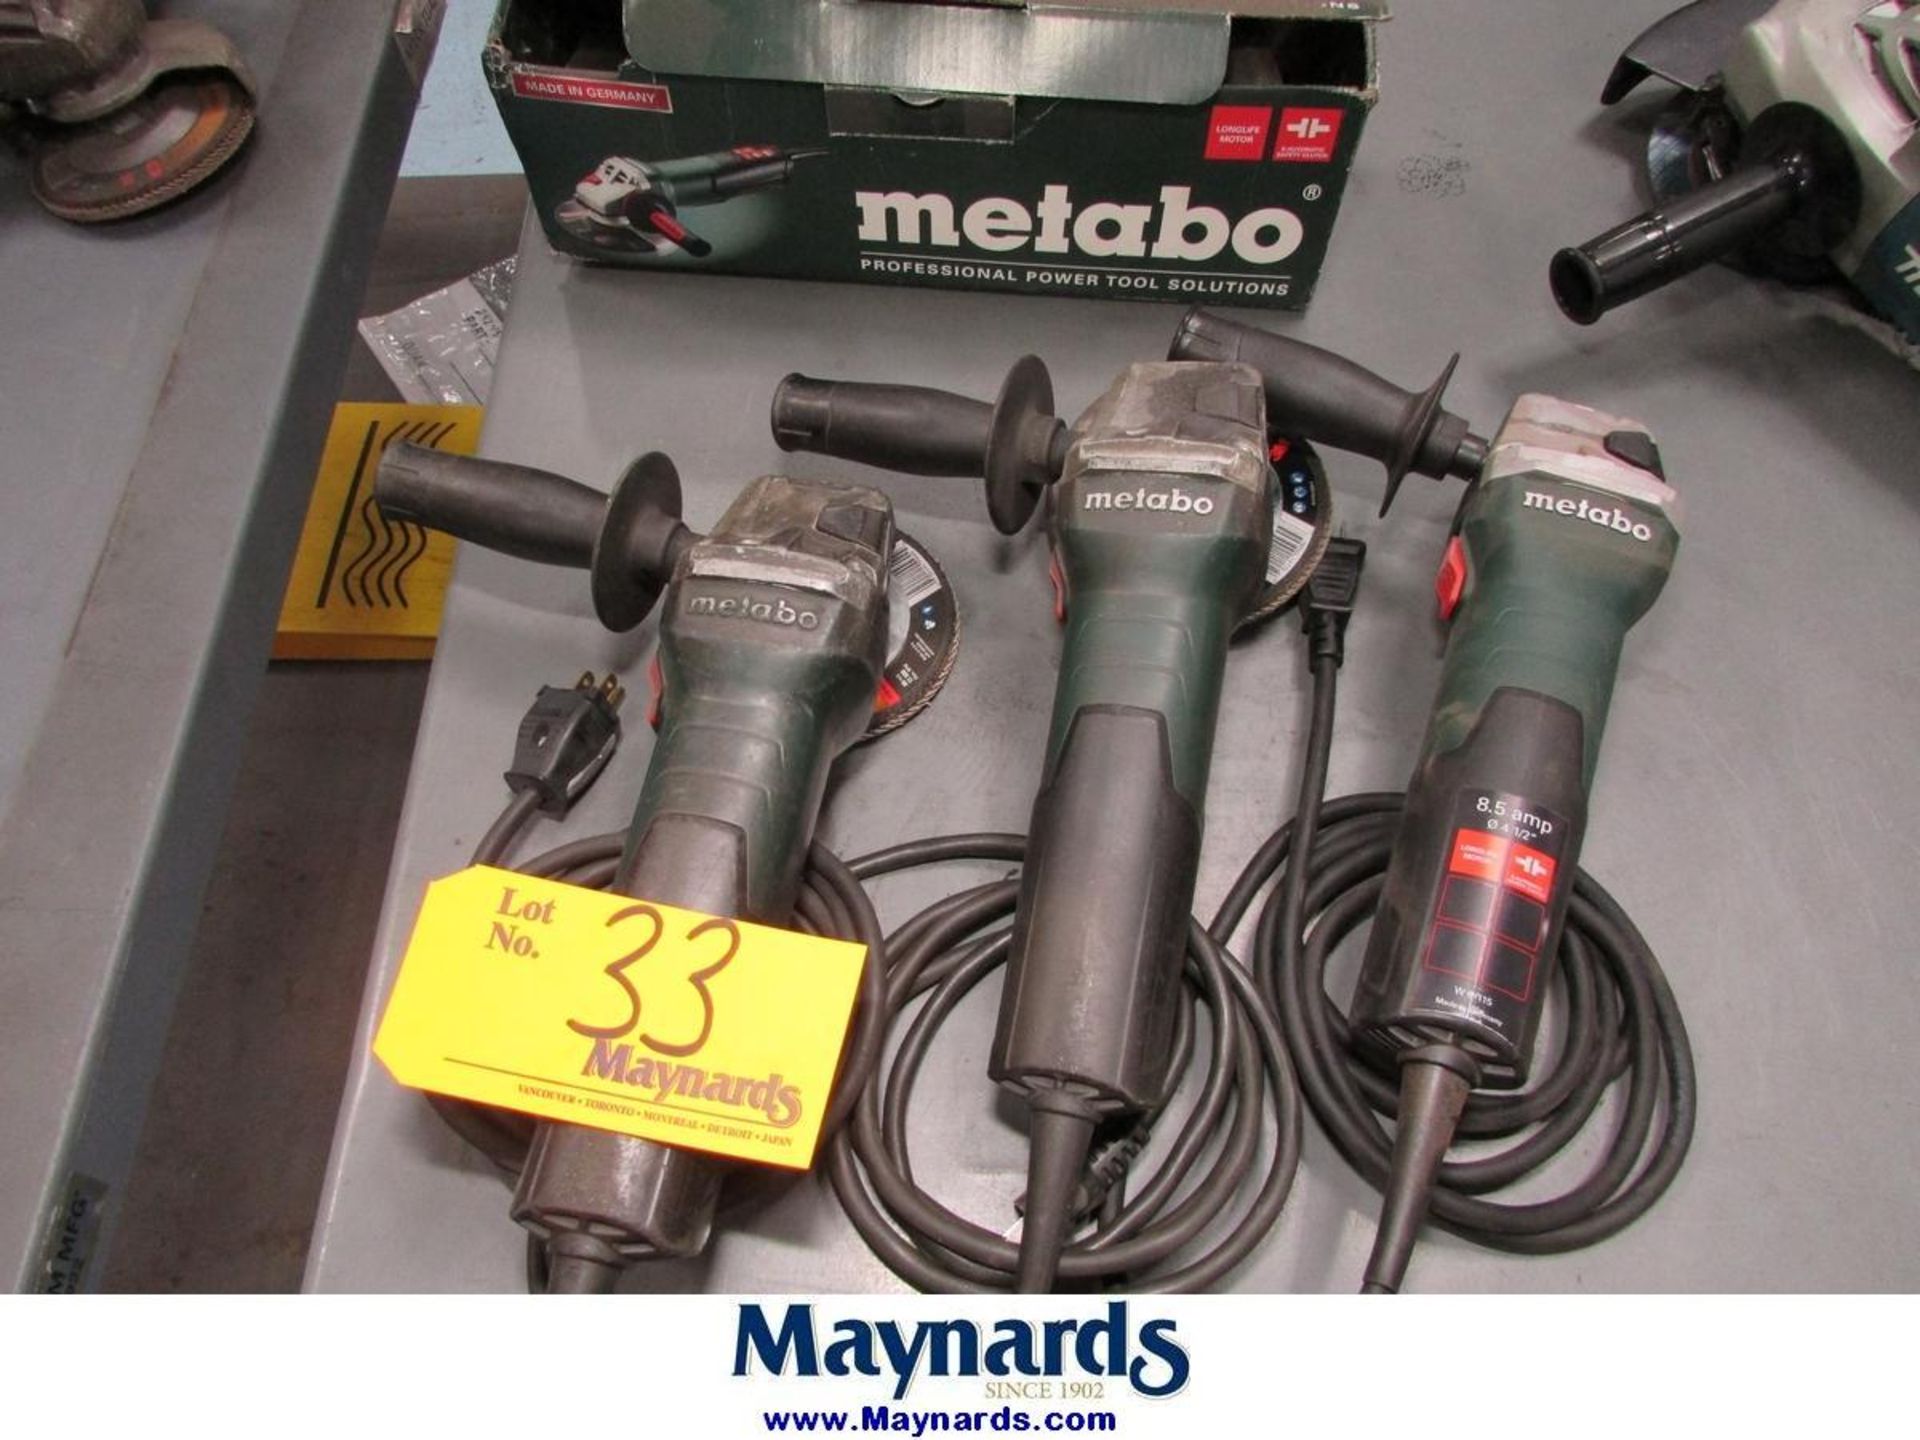 Metabo W9-115 (3) 4-1/2" Electric Angle Grinders - Image 2 of 3